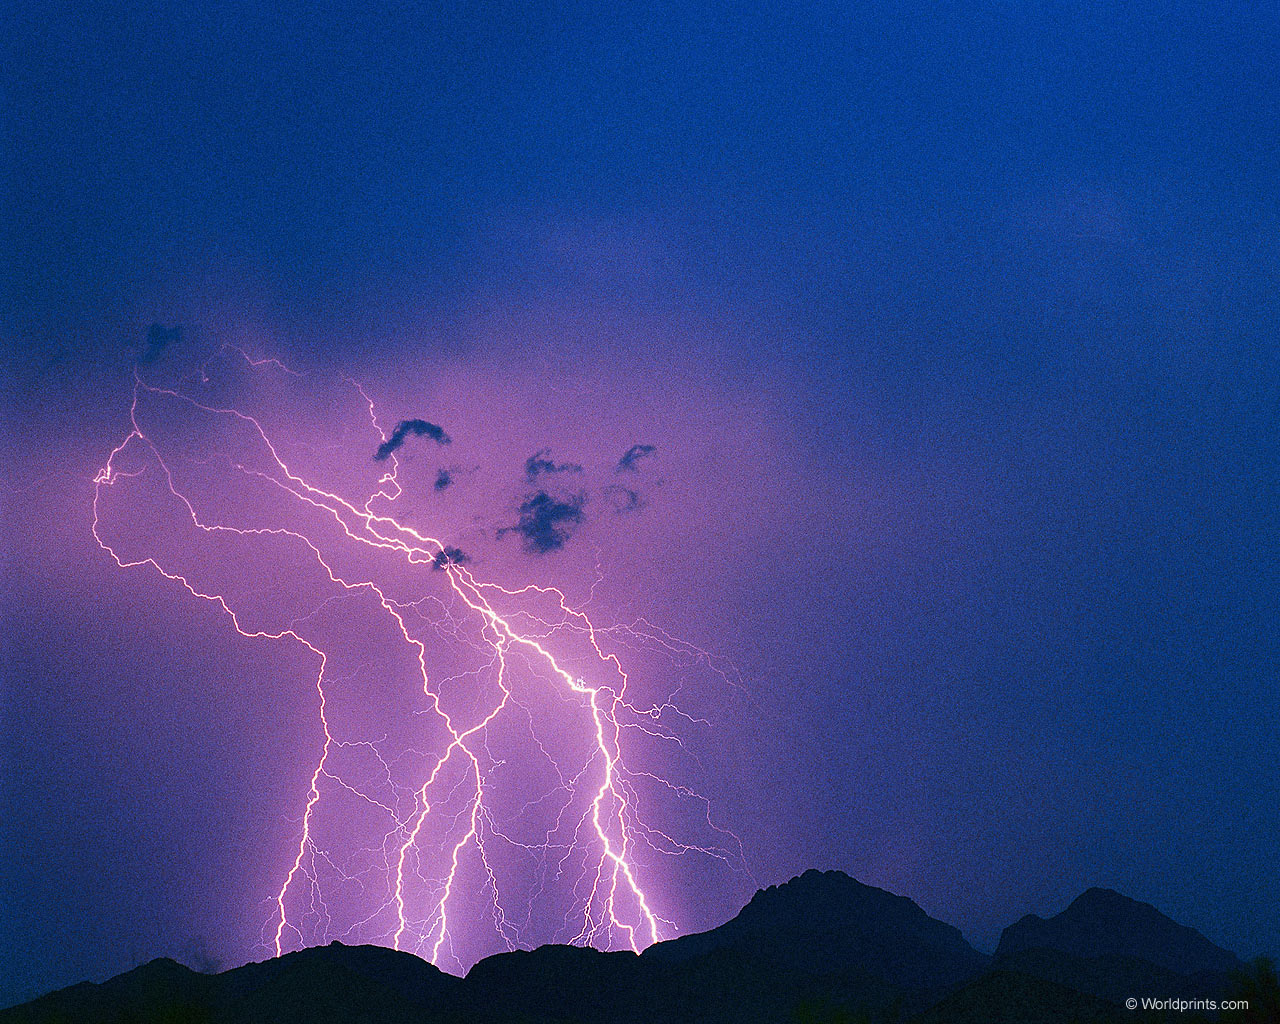 Download High quality Lightnings wallpaper / Nature / 1280x1024